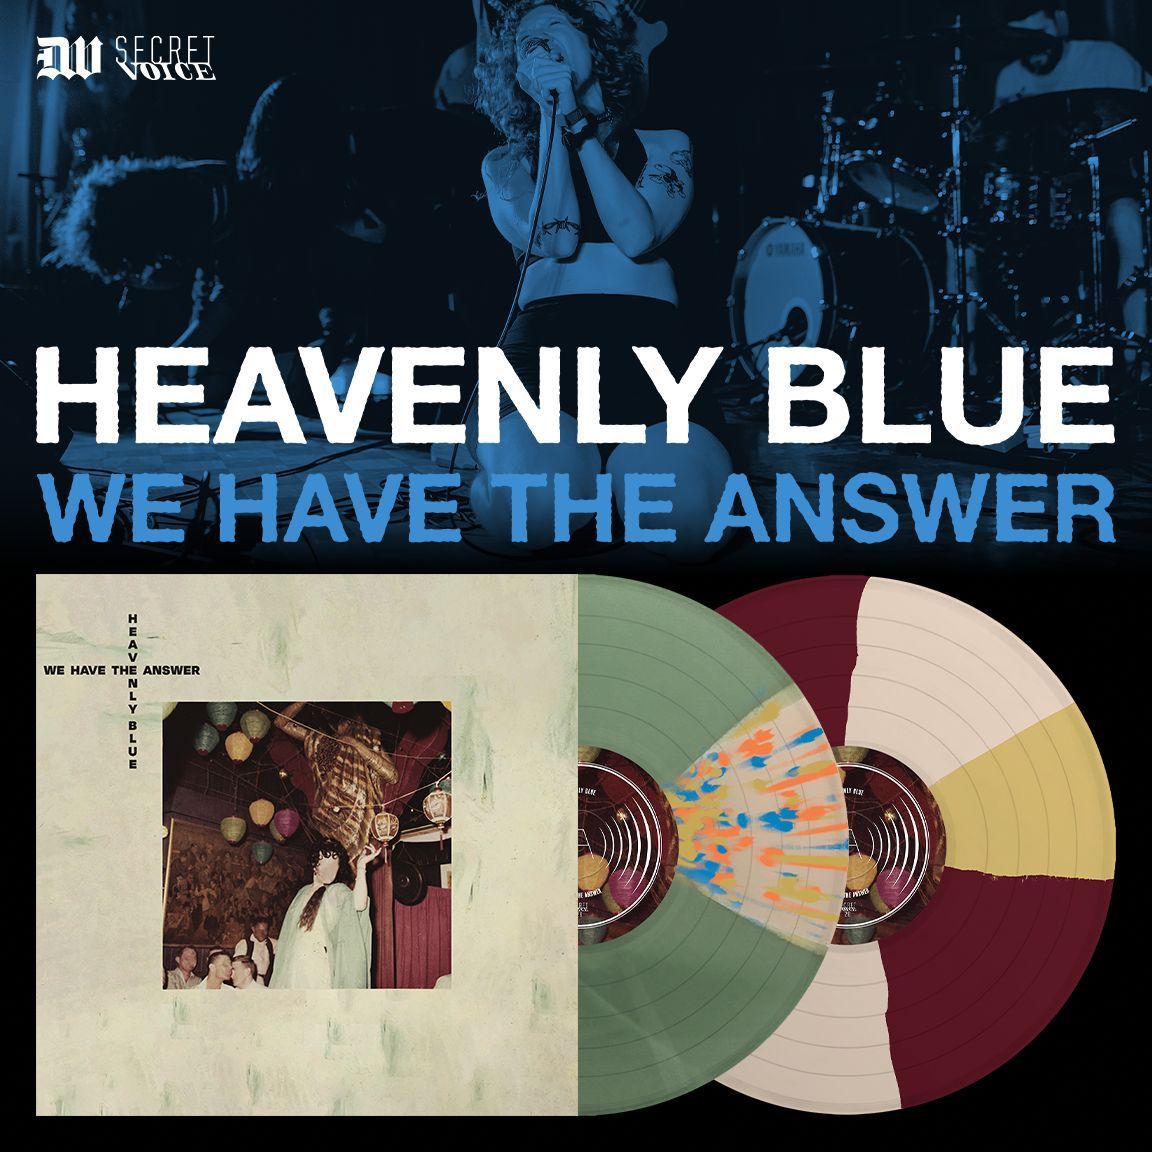 Heavenly Blue 'We Have The Answer' out now on Secret Voice Music & Merch → dthw.sh/wehavetheanswer #HeavenlyBlue #WeHaveTheAnswer #SecretVoice #DeathwishInc